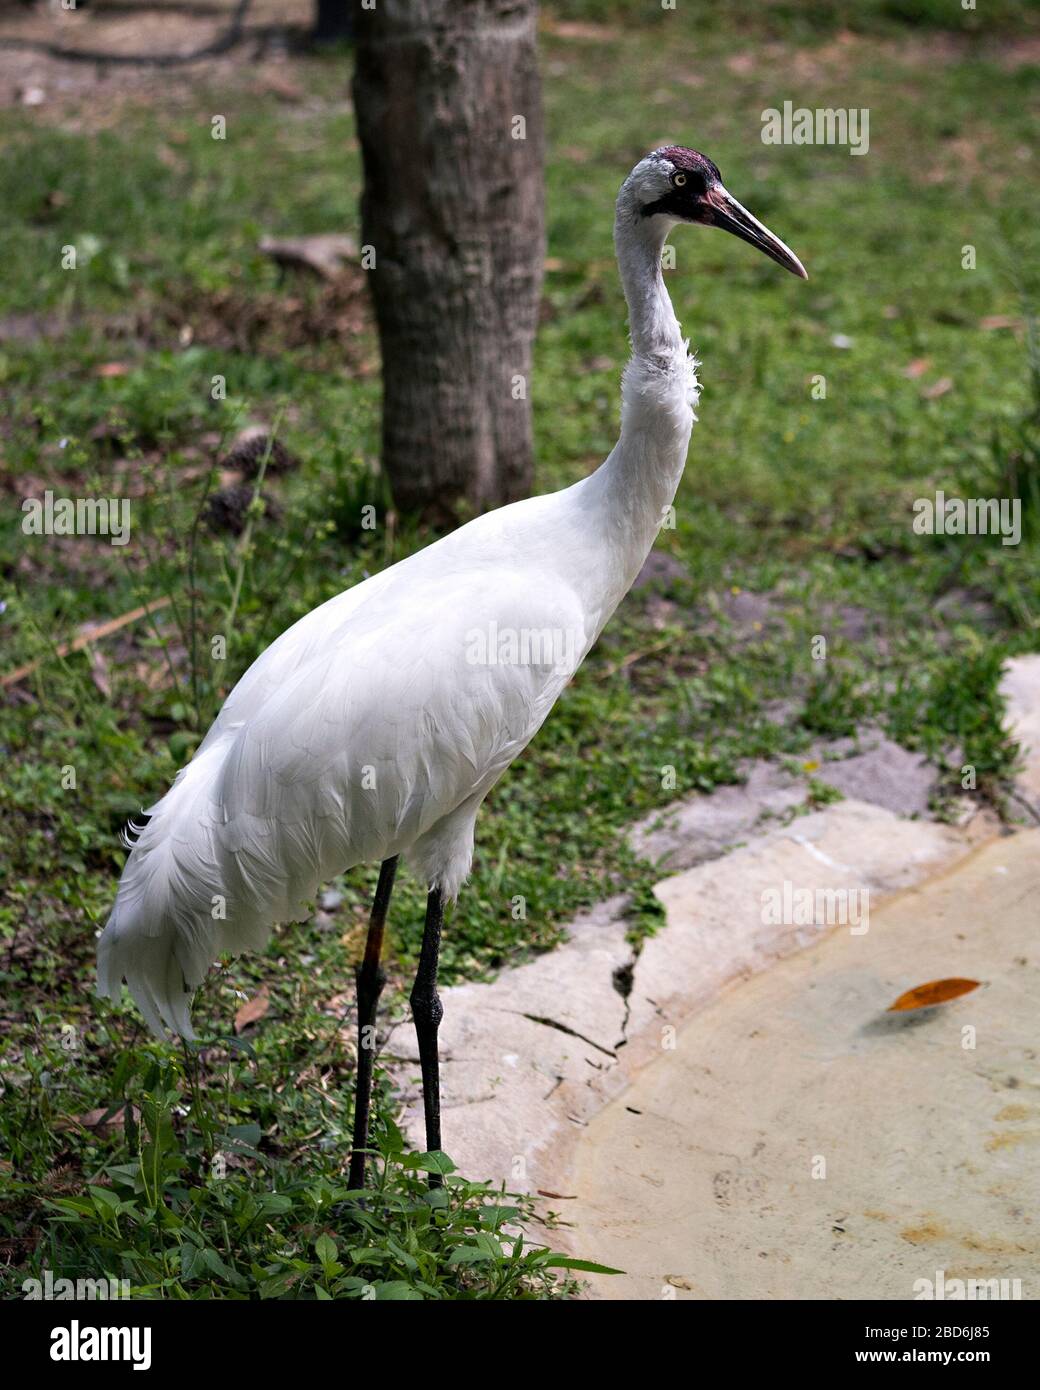 Whooping crane bird close-up profile view standing tall by the water with foliage background in its surrounding and environment. Stock Photo